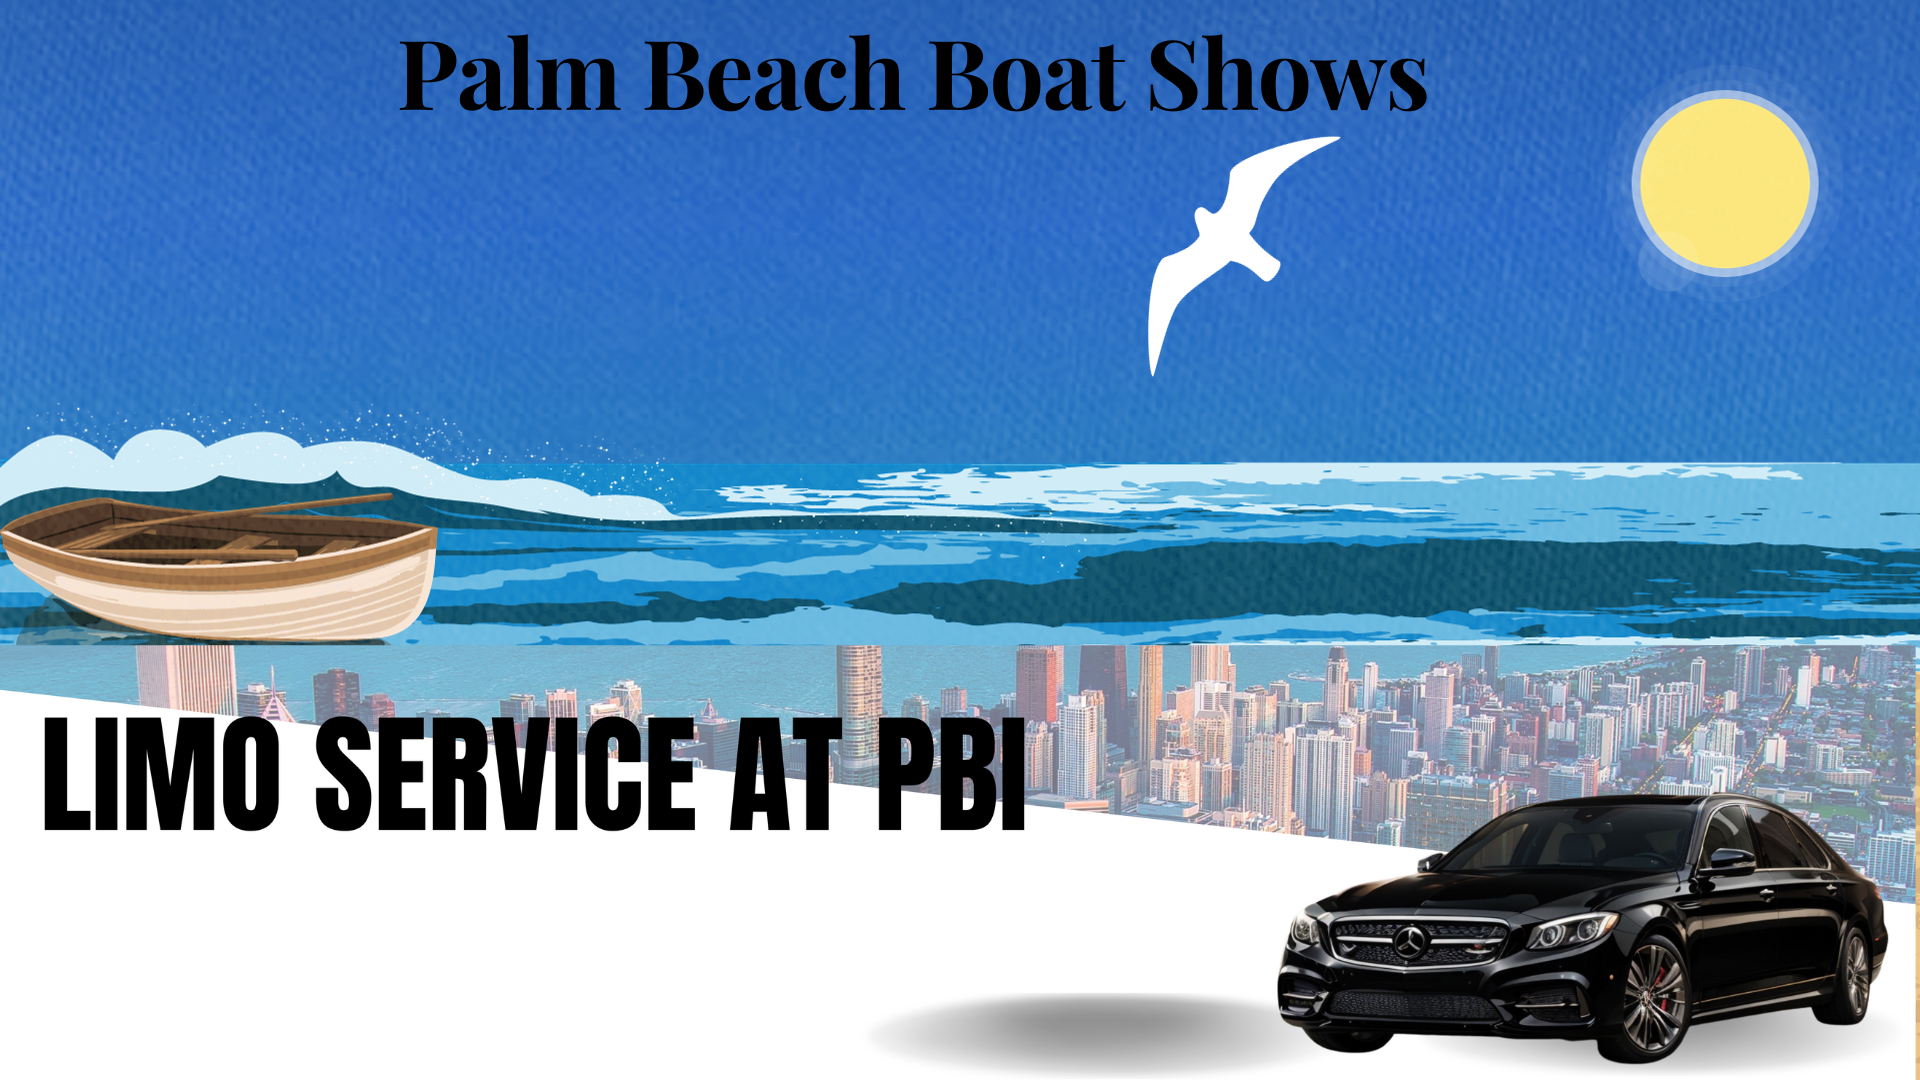 Shuttle & Limo Rental For Boat Show, Boats Show in Palm Beach, Limo & Car Service for Boats Show in Palm Beach